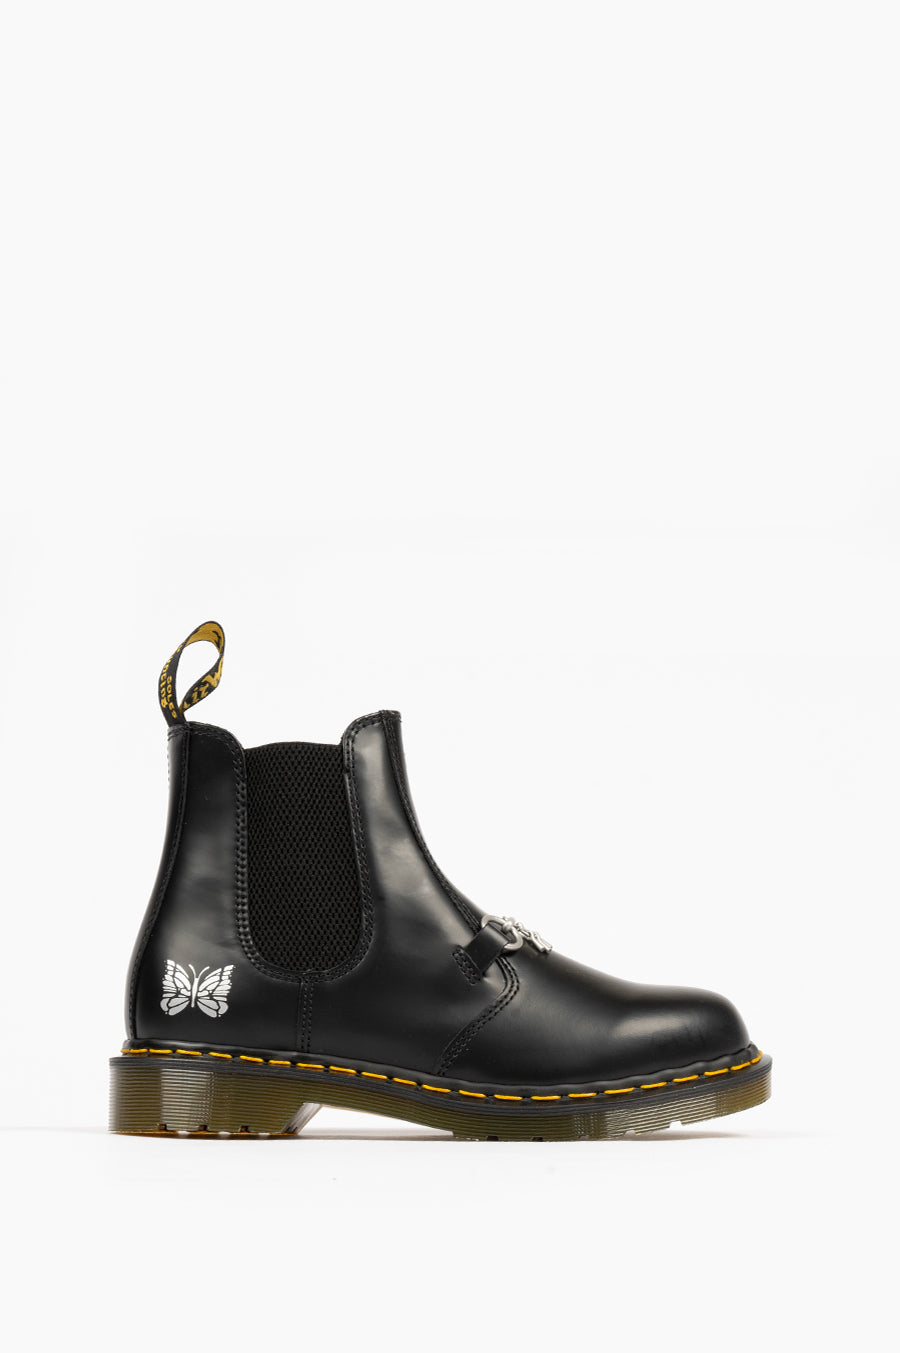 DR MARTENS 2976 SNAFFLE NEEDLES BLACK SMOOTH